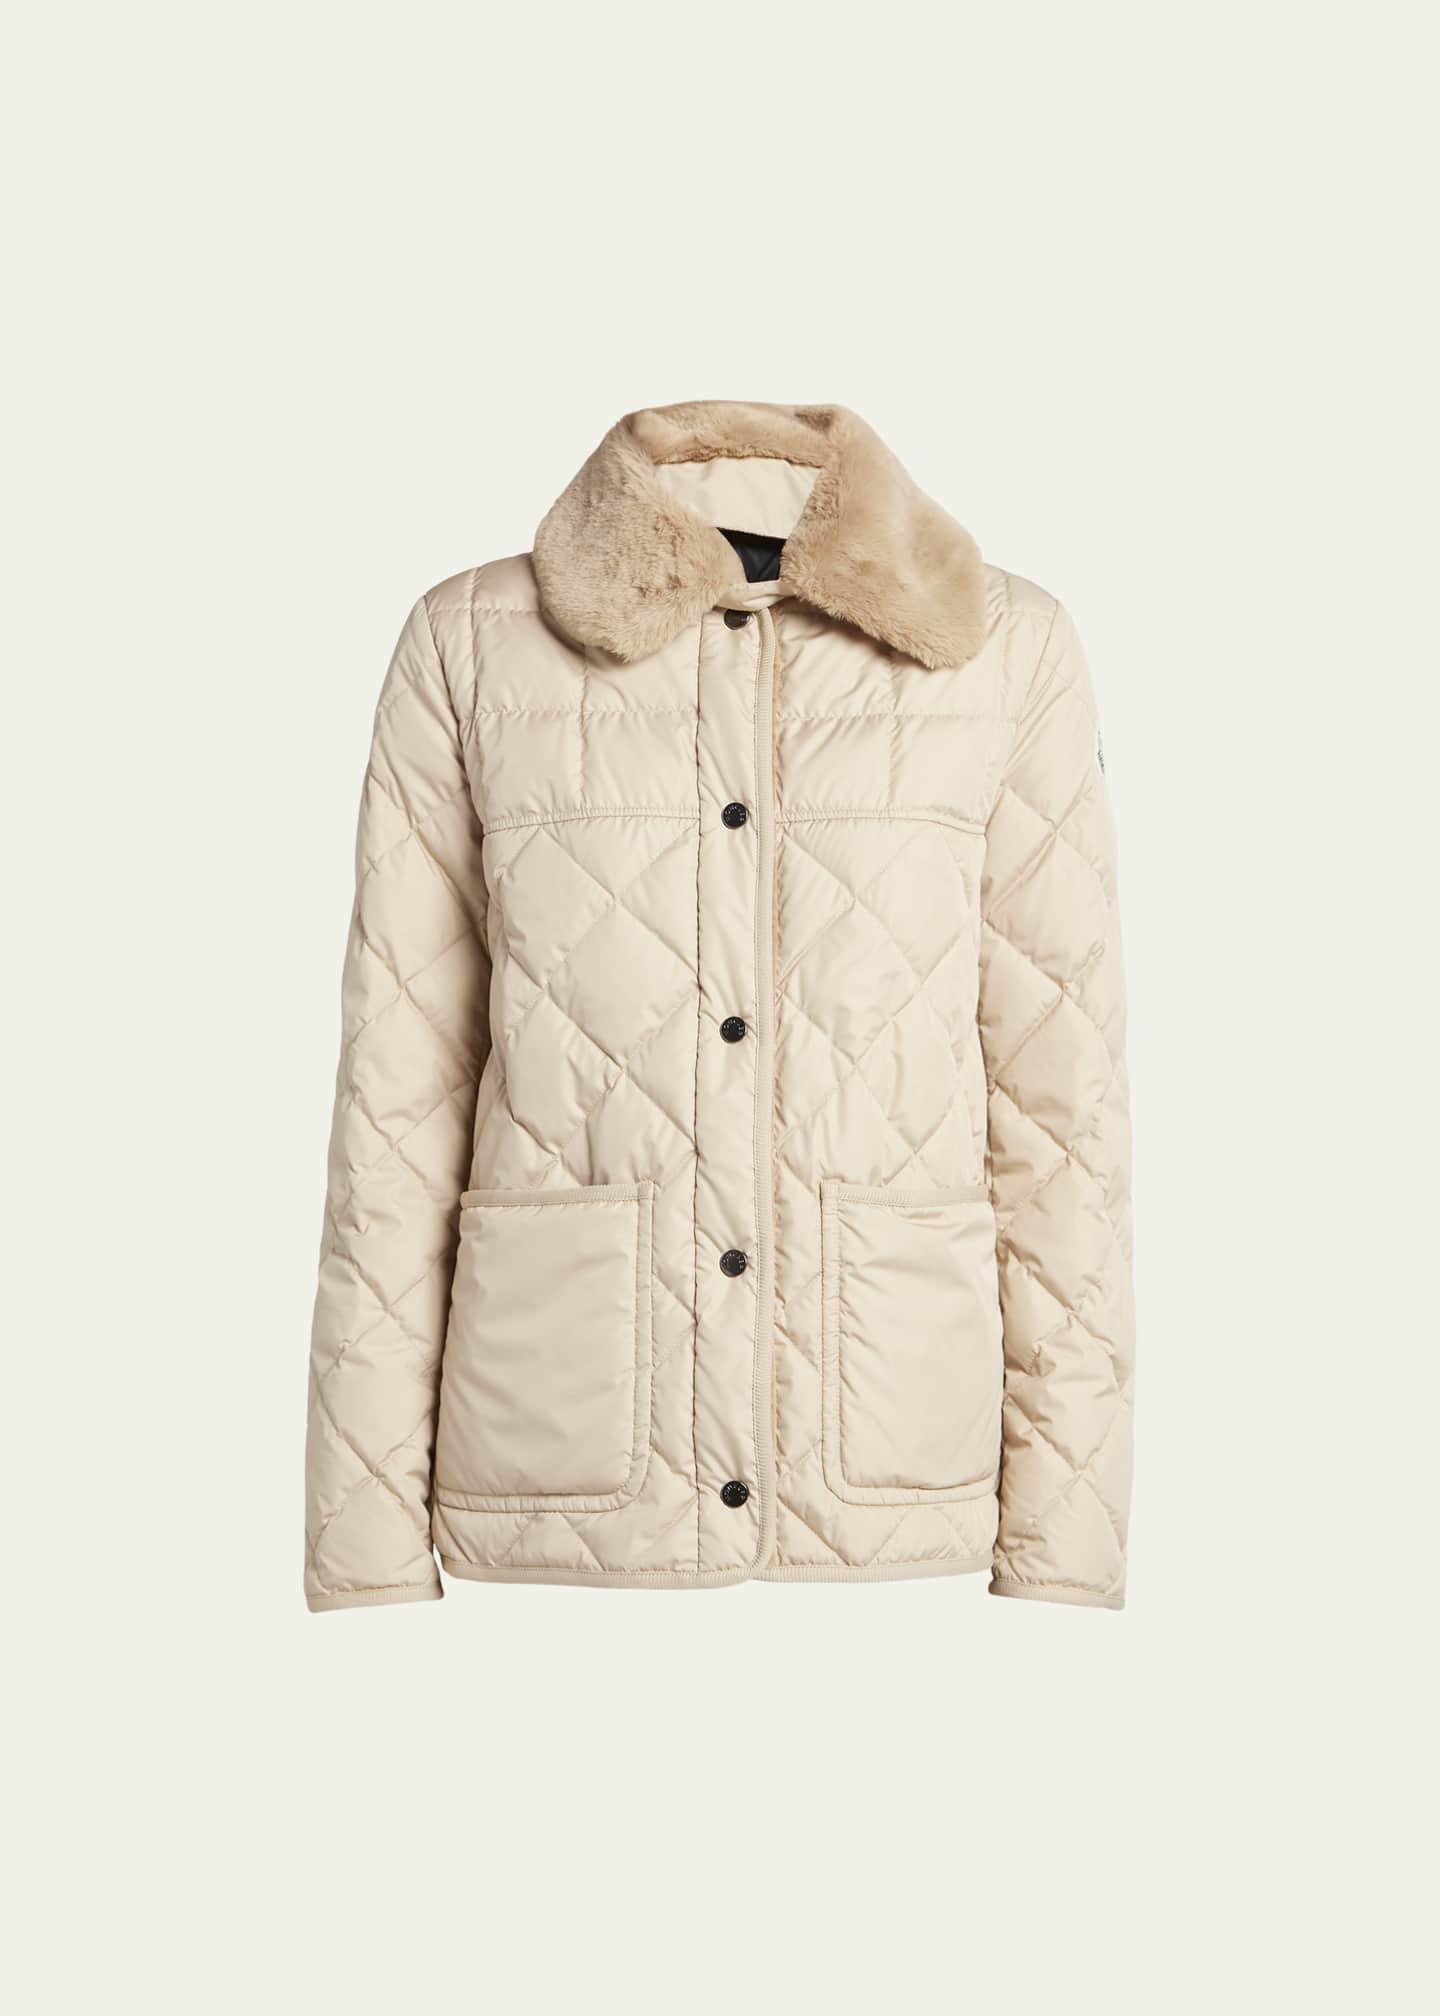 Moncler Cygne Quilted Jacket with Faux Fur Trim - Bergdorf Goodman